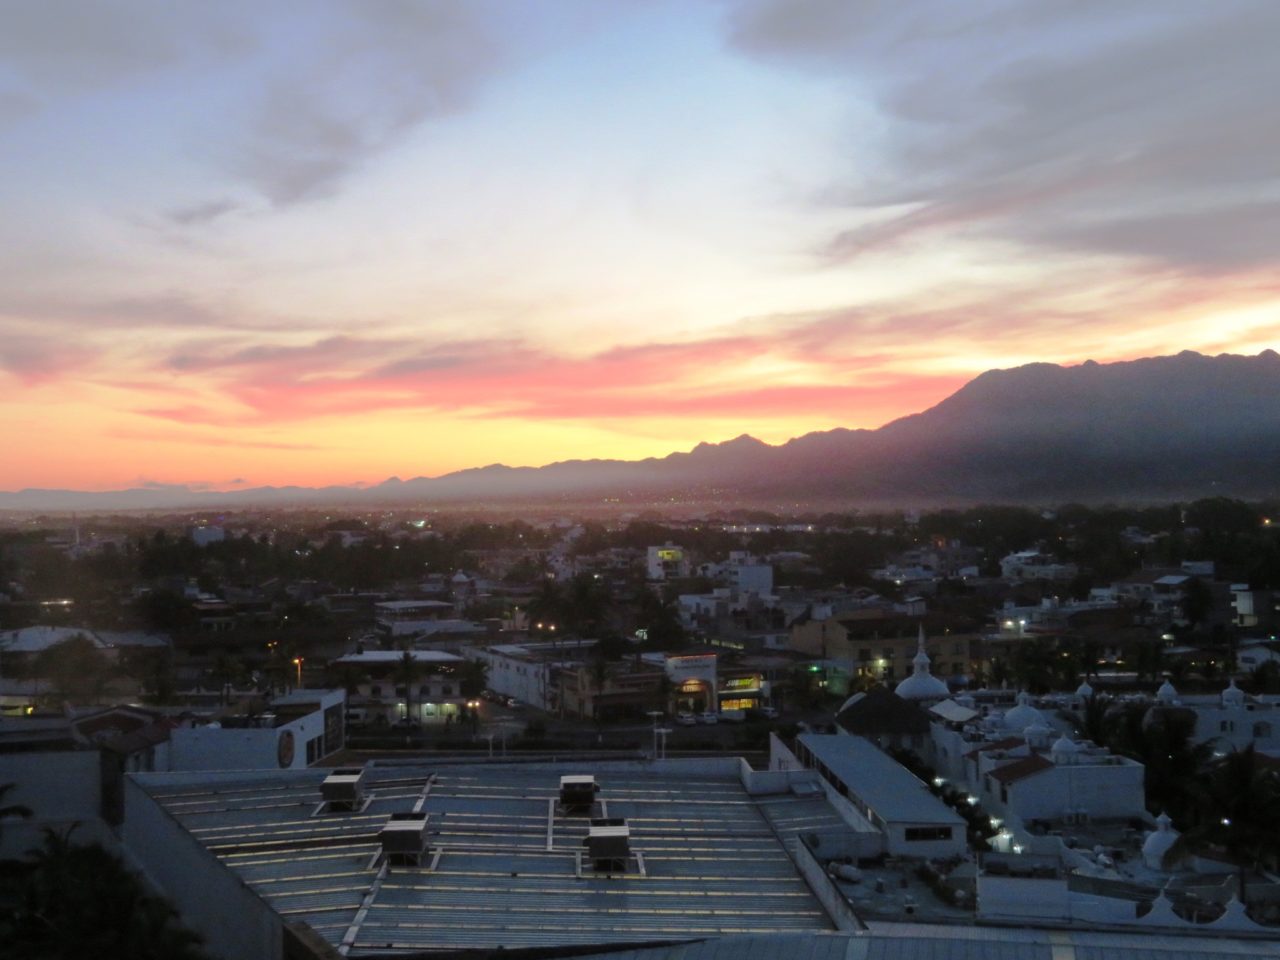  Sun rising behind the Sierra Madre Mountains